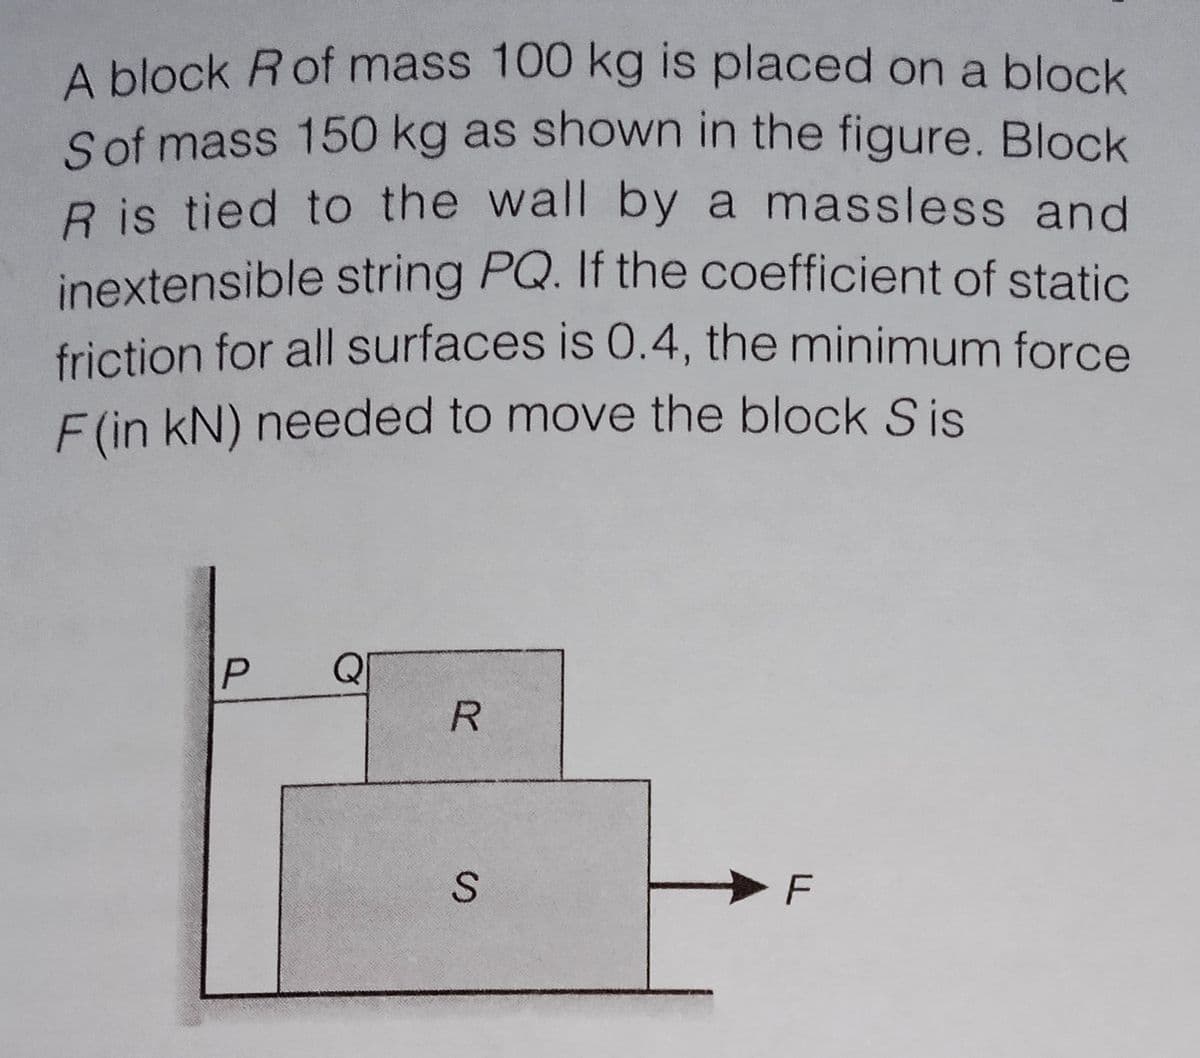 A block Rof mass 100 kg is placed on a block
a
Sof mass 150 kg as shown in the figure. Block
R is tied to the wall by a massless and
inextensible string PQ. If the coefficient of static
friction for all surfaces is 0.4, the minimum force
F (in kN) needed to move the block Sis
Q
R.
